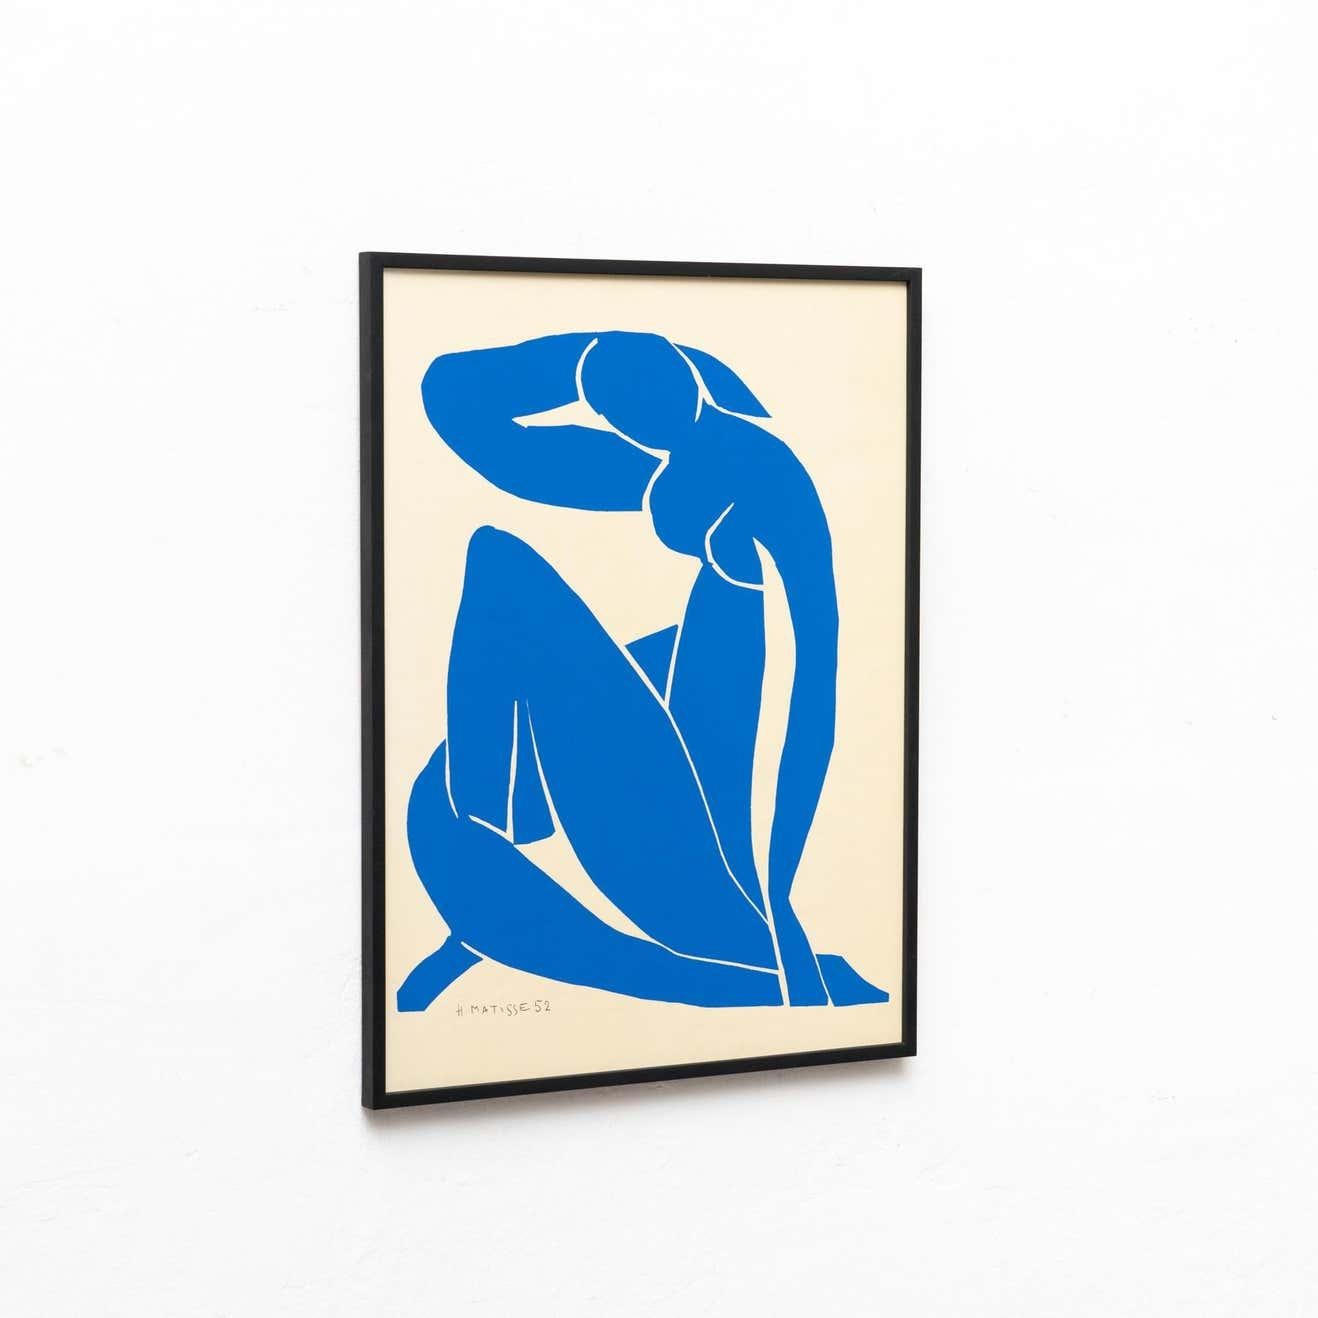 Color lithograph after the work by Henri Matisse, circa 1970.

Signed in the stone.
Edited by Edition des Nouvelles Images, France.
Framed.

Henri Matisse whether working as a draftsman, a sculptor, a printmaker or a painter Henri Matisse was